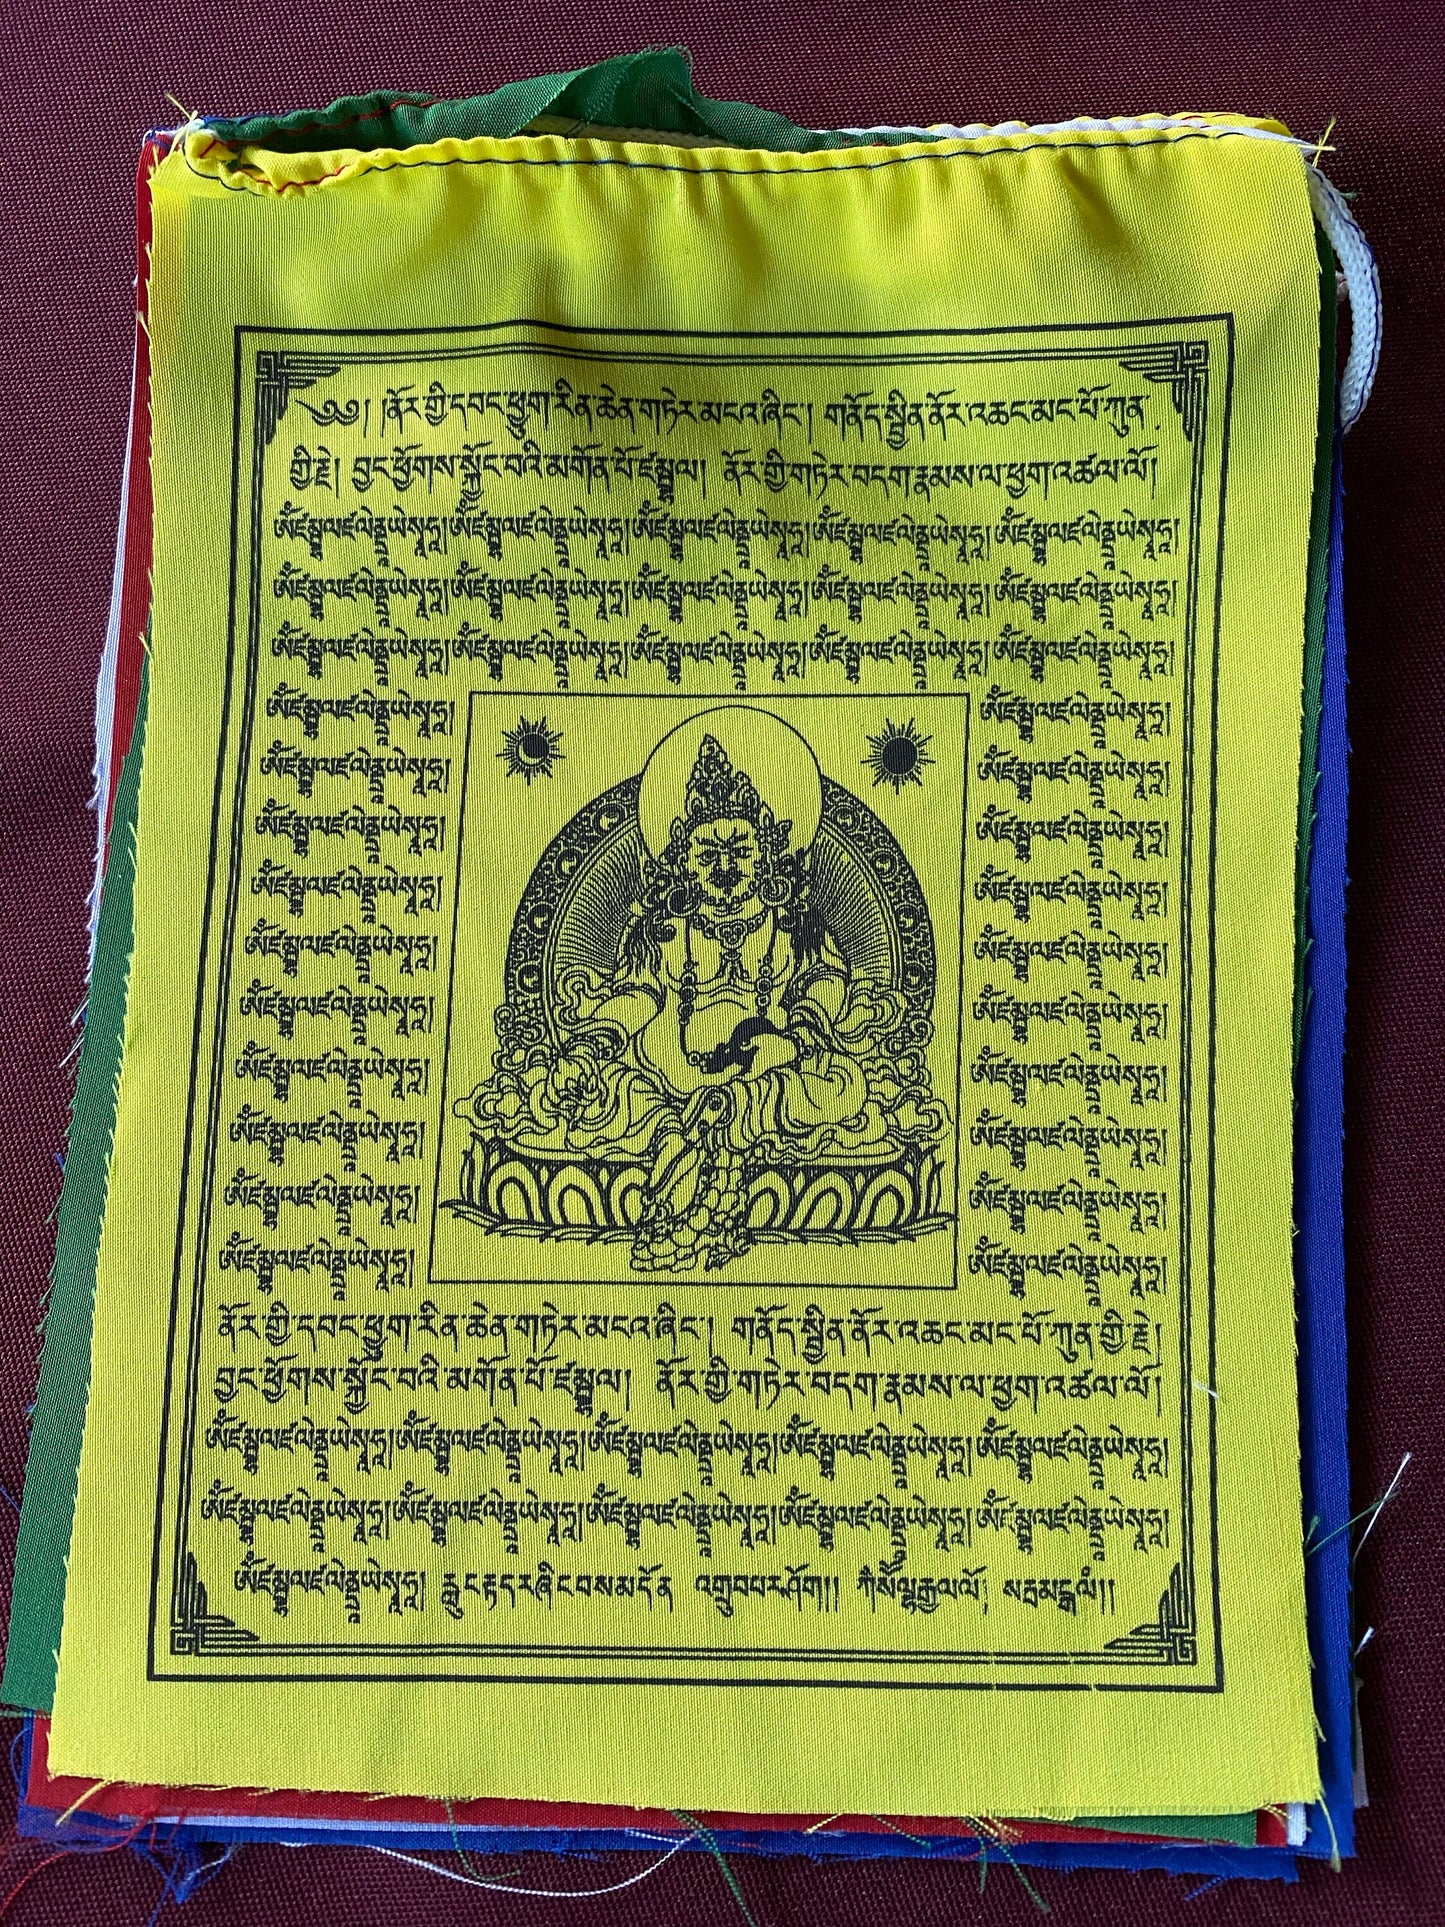 a single yellow flag 6 inch by 7.5 inch Dzambhala wealth deity prayer flags from a  five colored set on a medium background